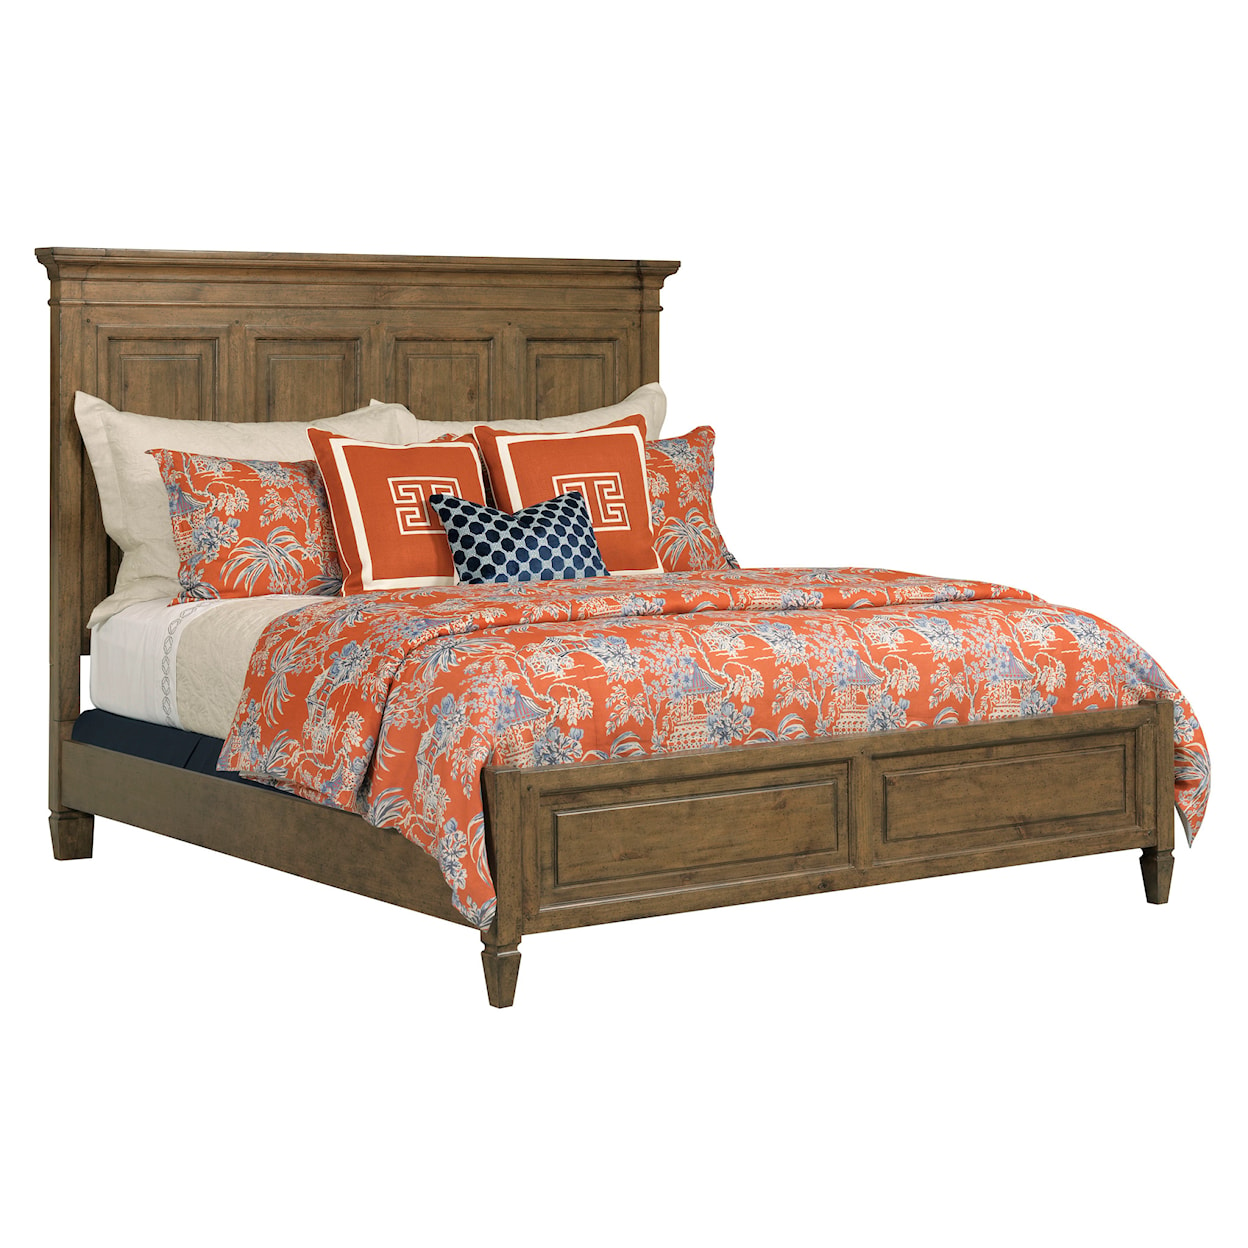 Kincaid Furniture Ansley Hartnell Cal King Panel Bed